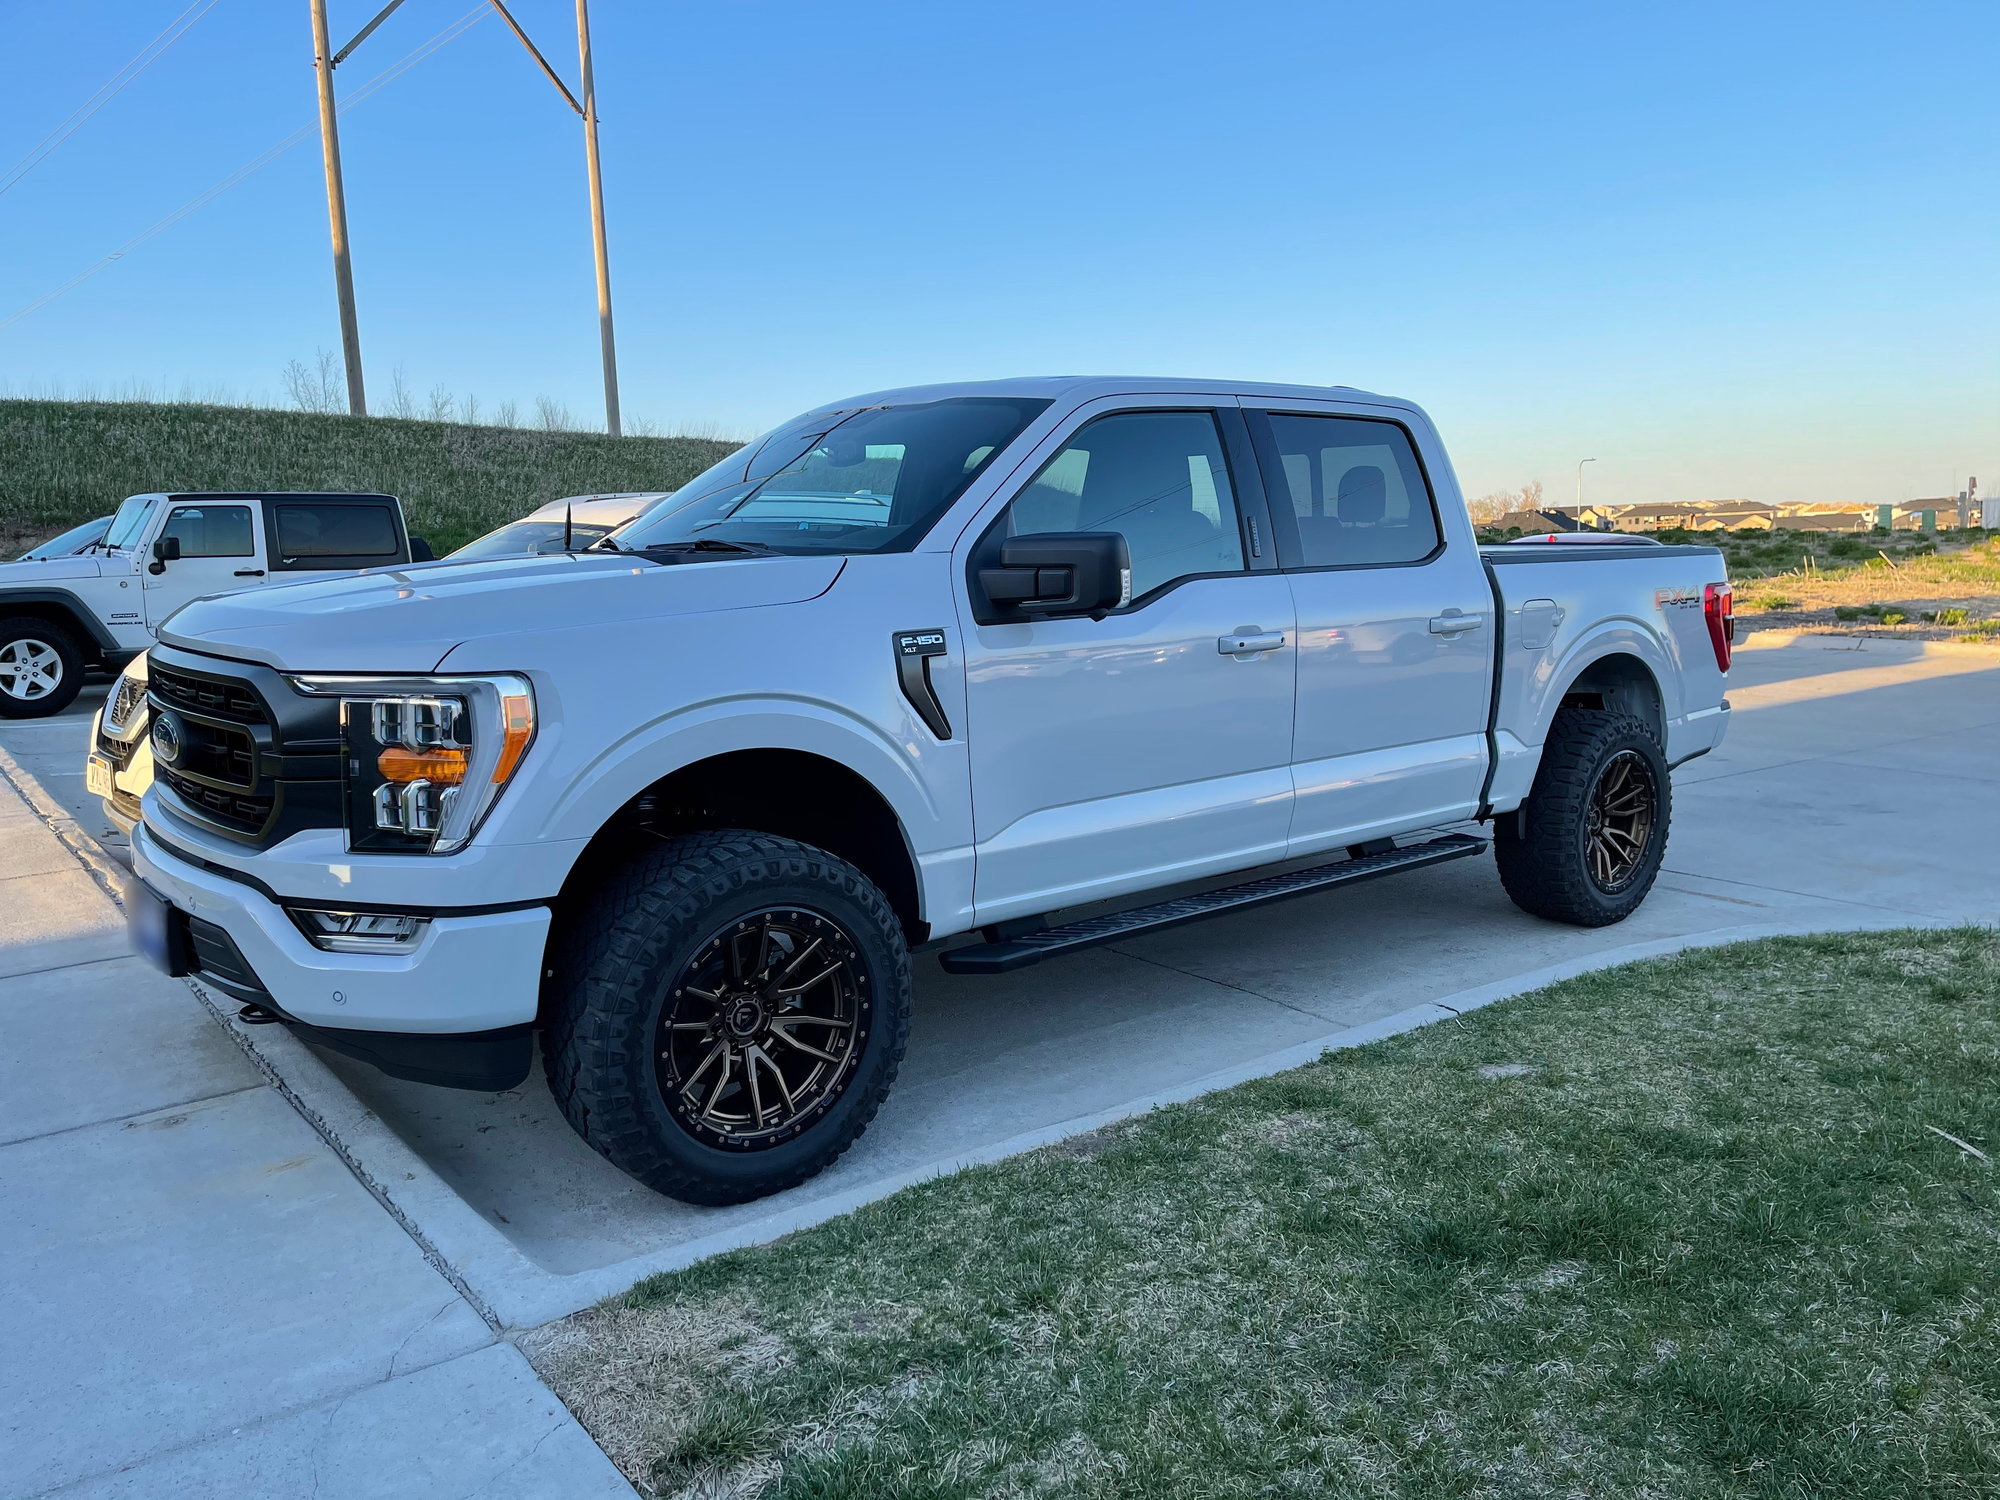 New 2021 Space White F150 Ford F150 Forum Community of Ford Truck Fans